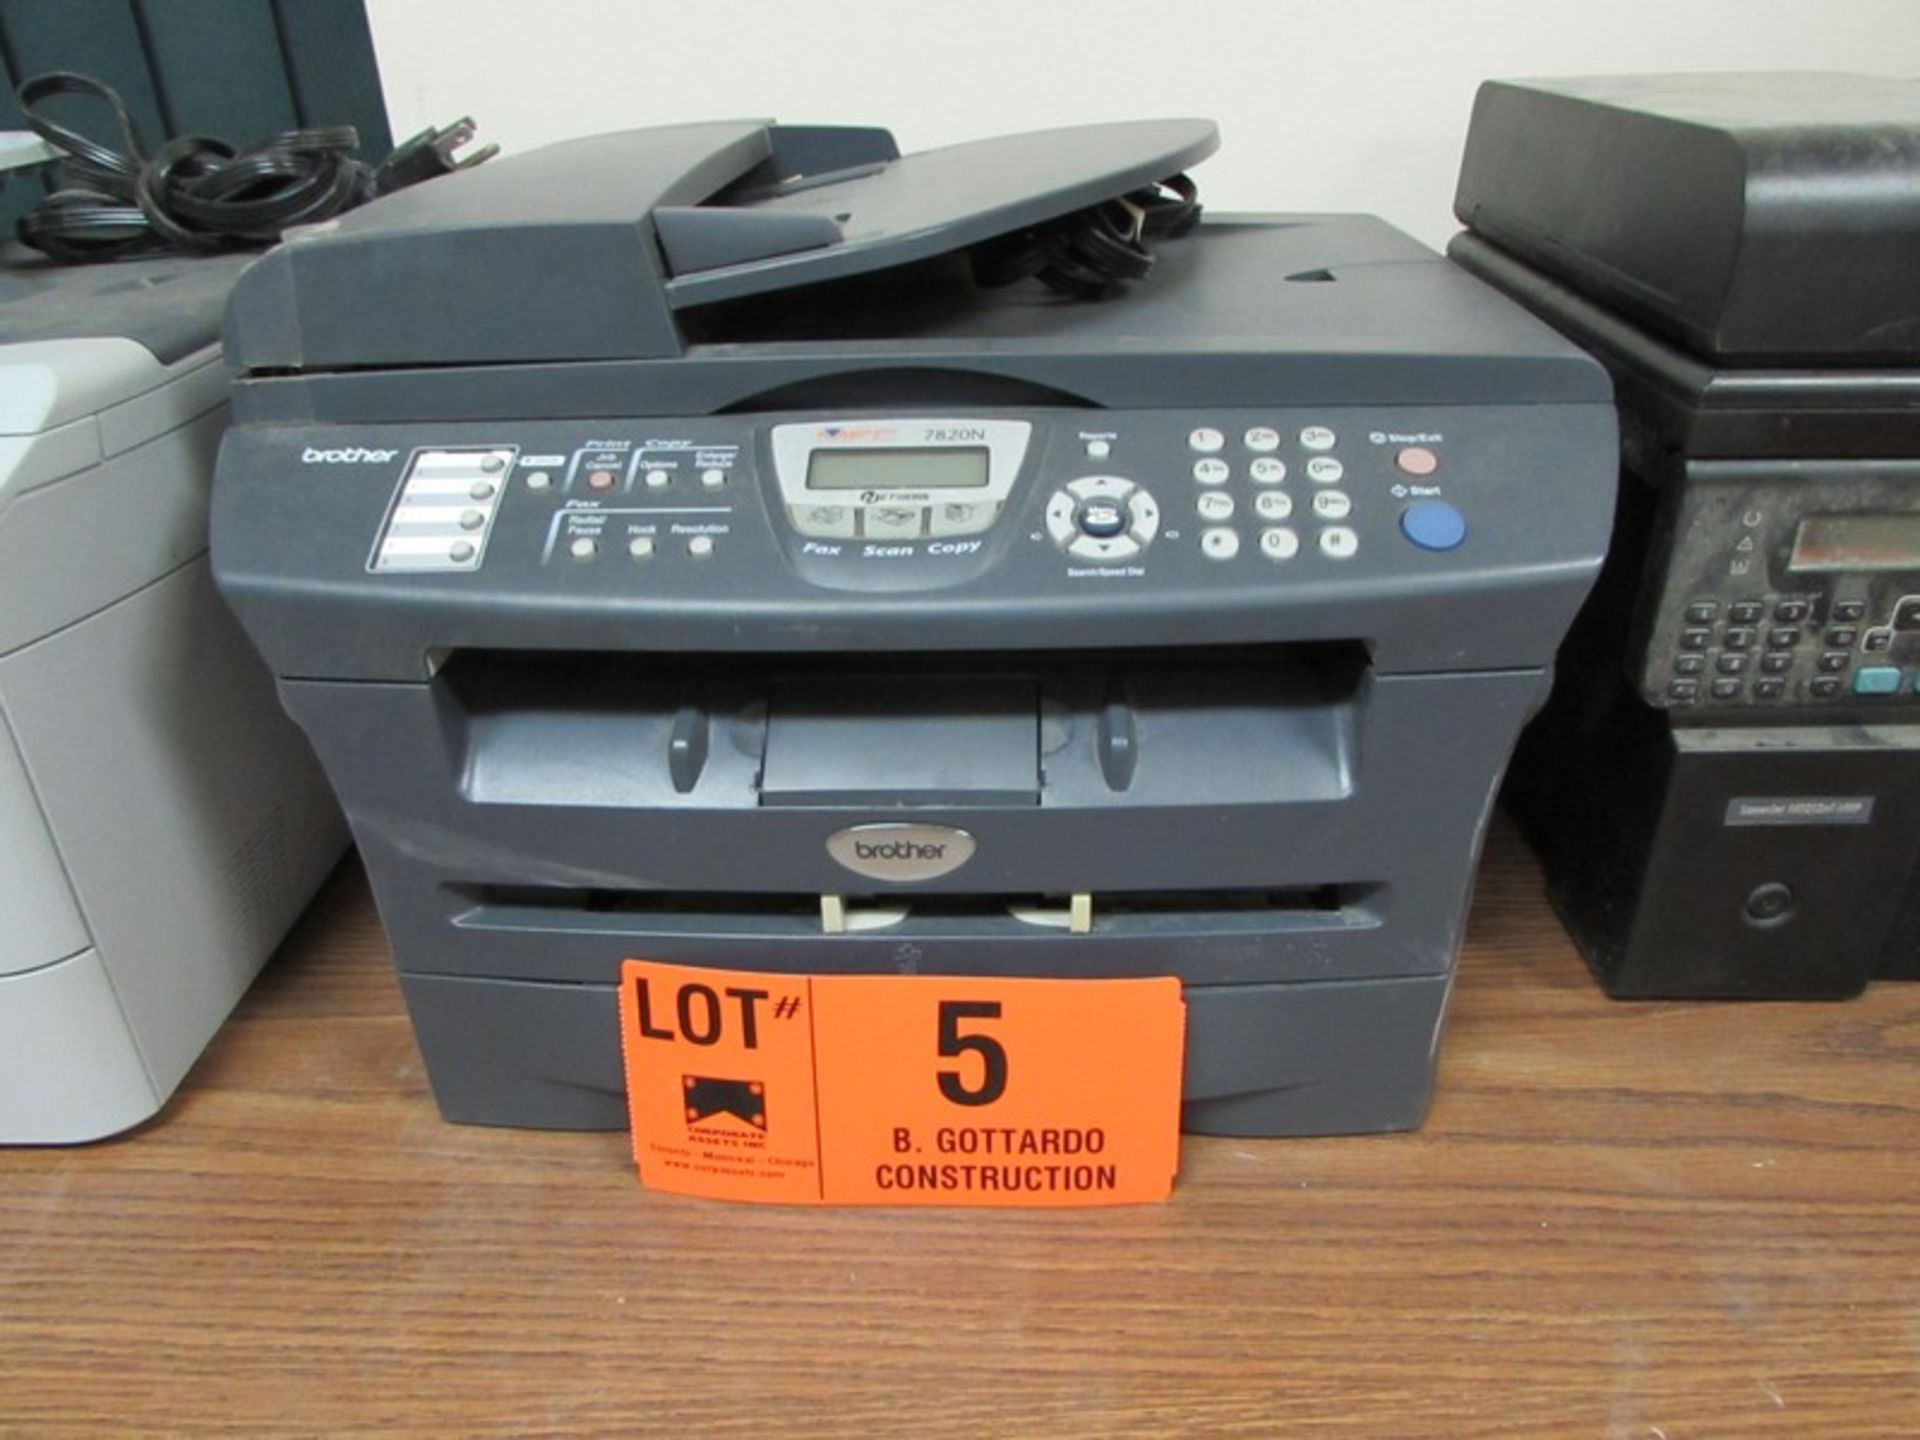 BROTHER MFC 7820N ALL-IN-ONE WITH FAX, SCAN, COPY, PRINT CAPABILITY